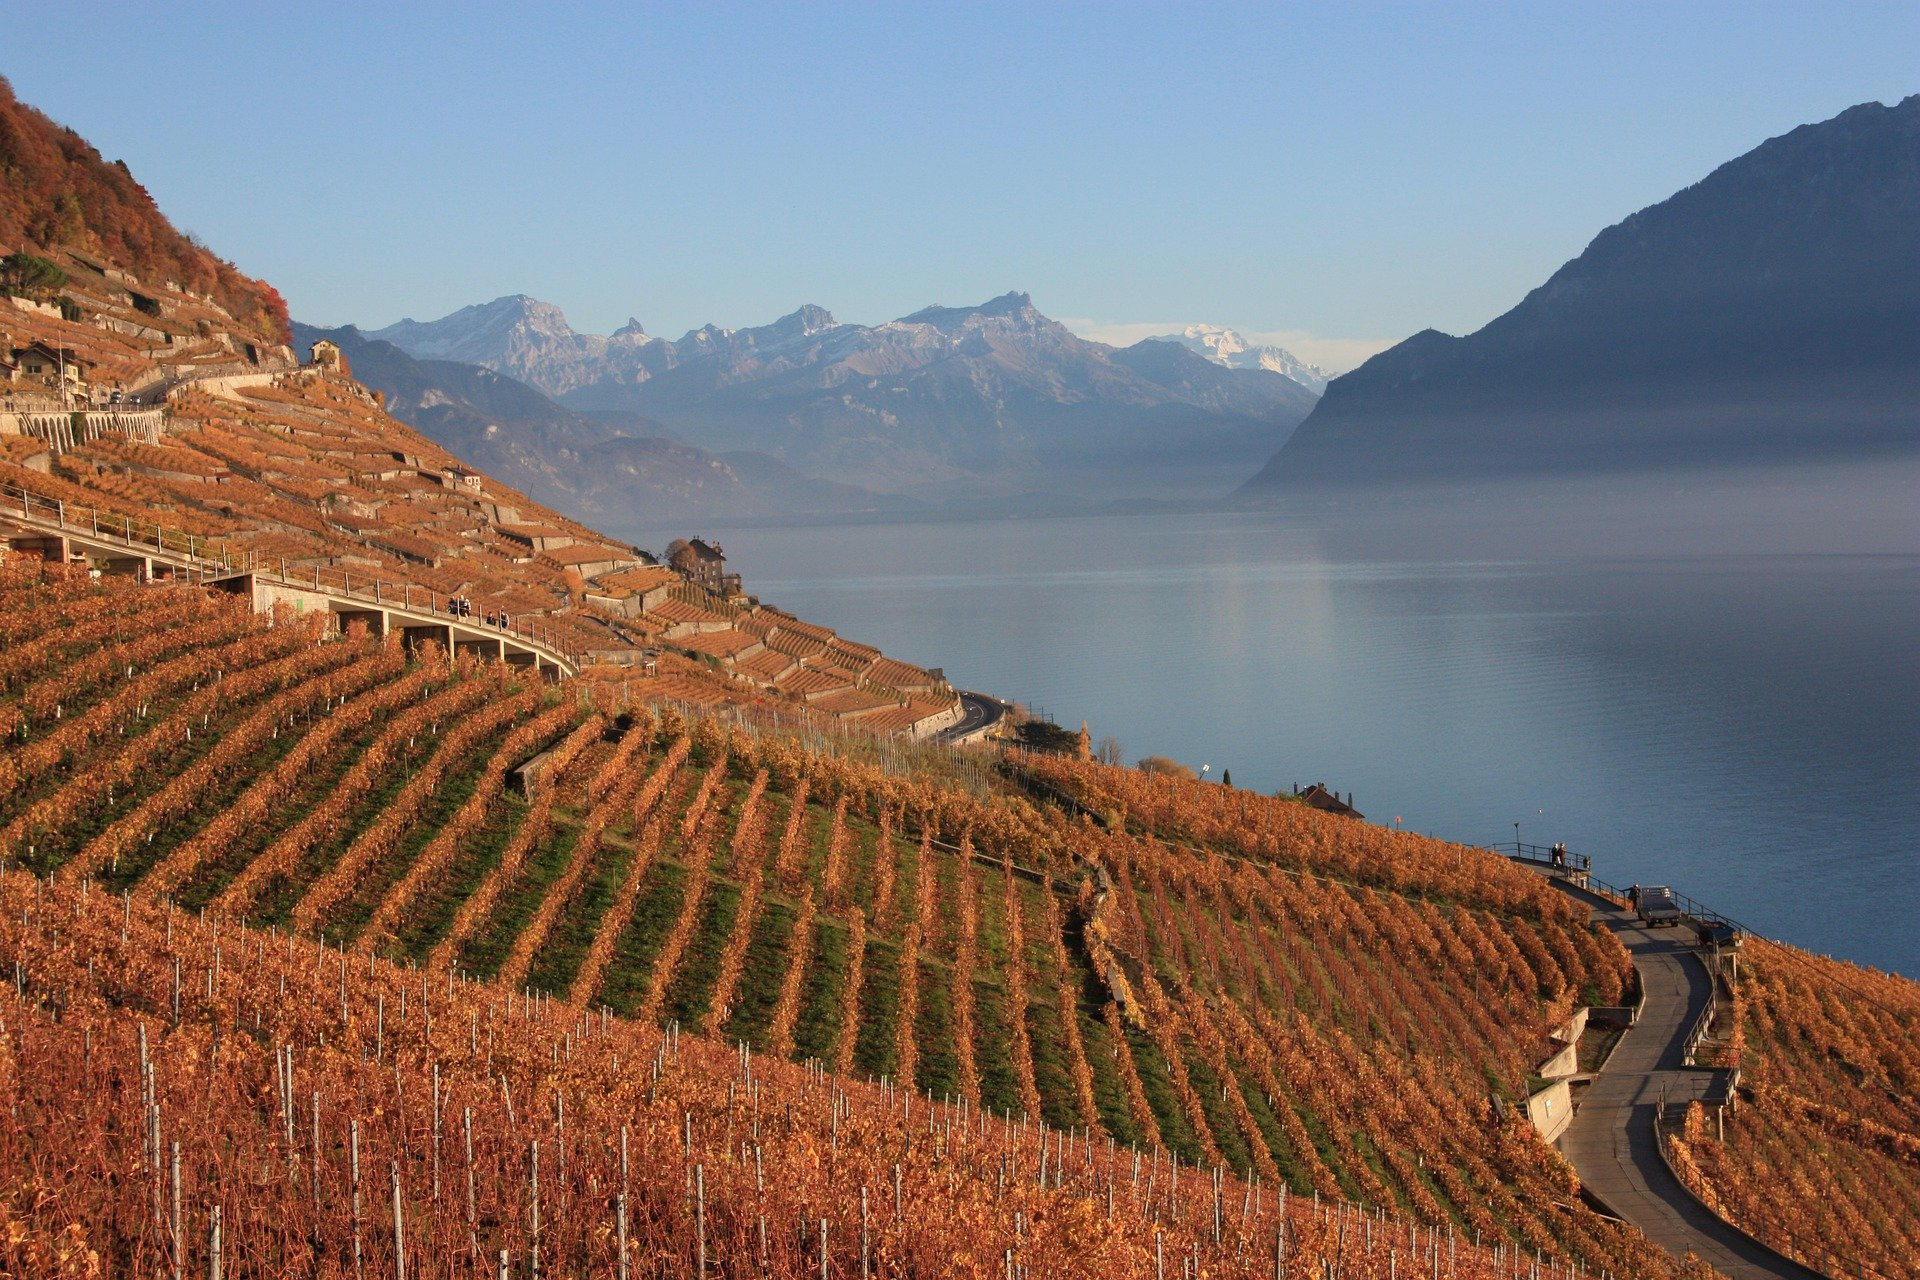 Vineyards overlooking mountains and a lake in Switzerland -- a truly amazing wine experience :)